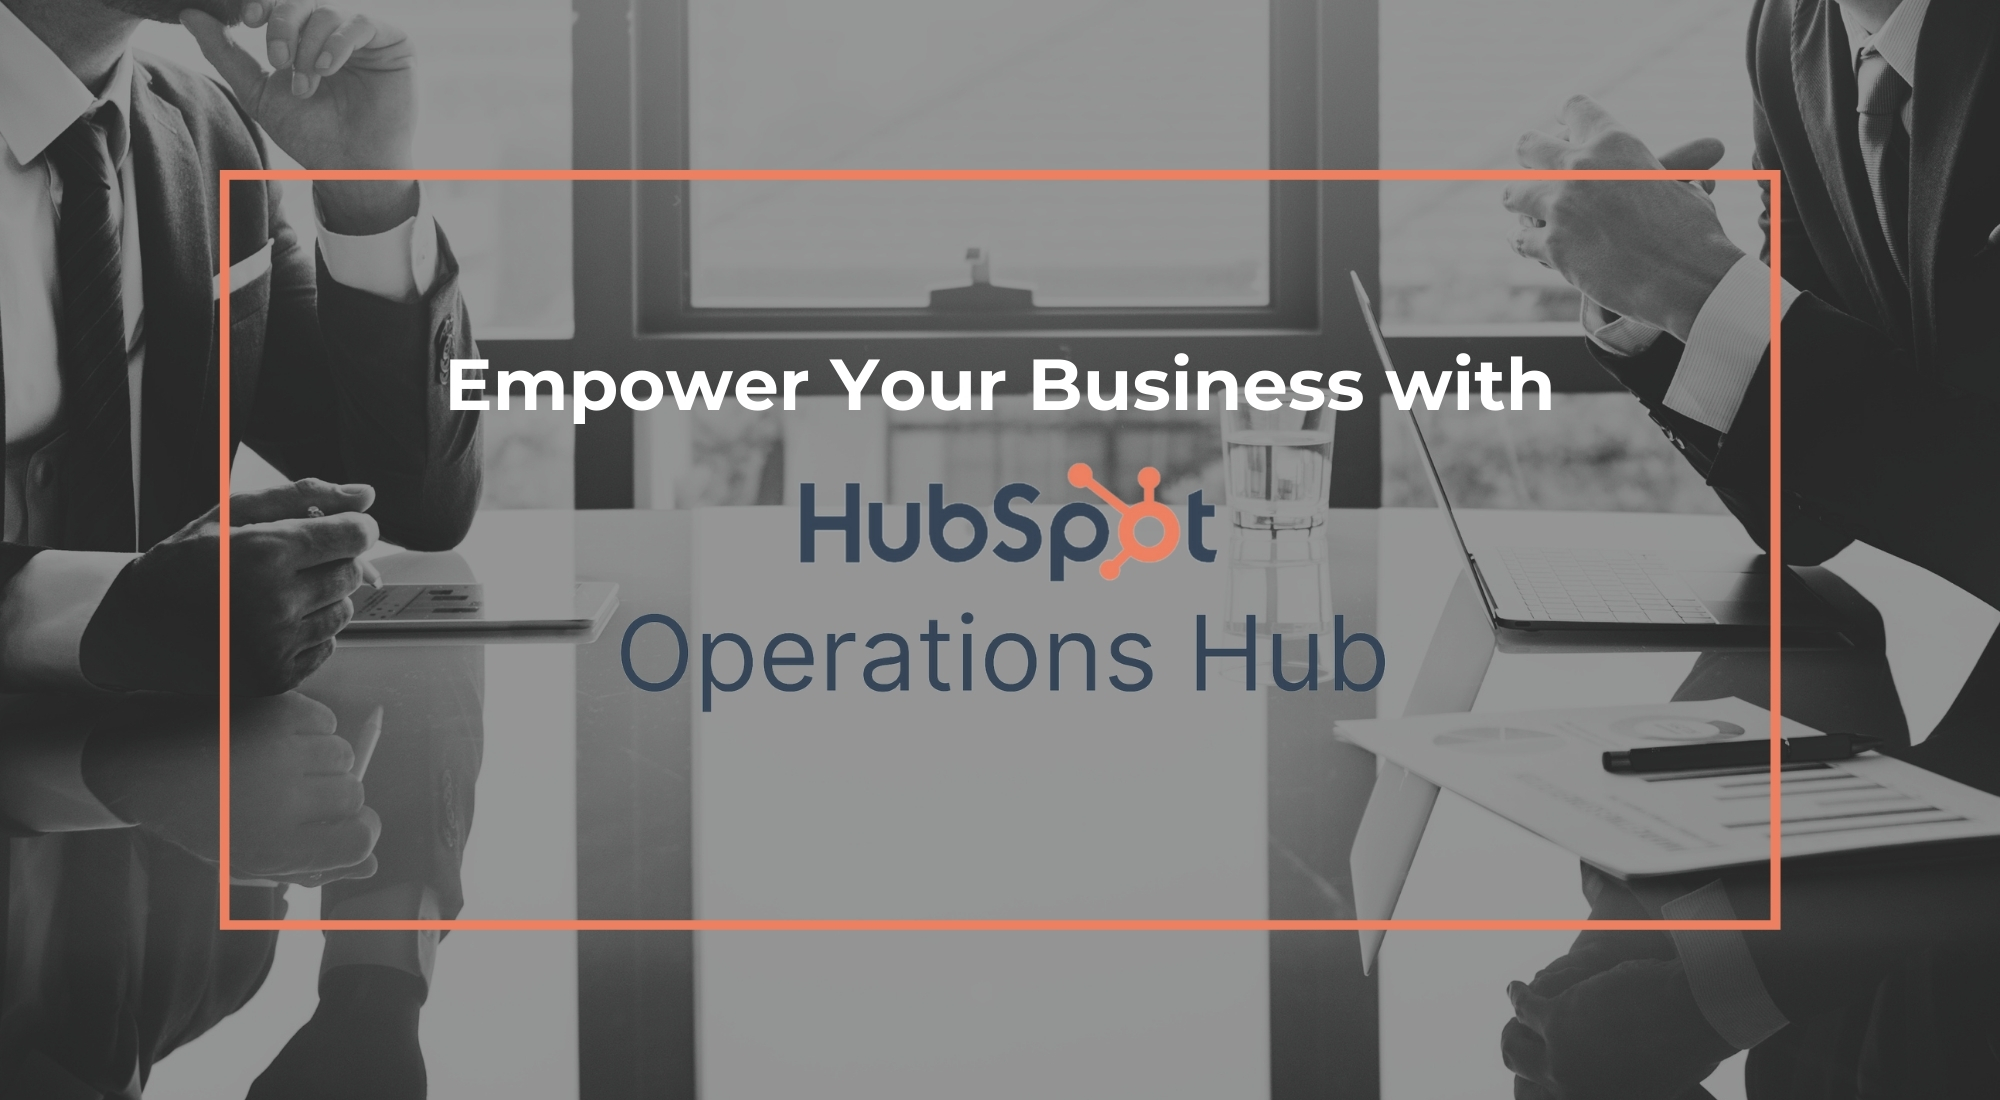 Breaking Silos - Empower Your Business with HubSpot's Operations Hub